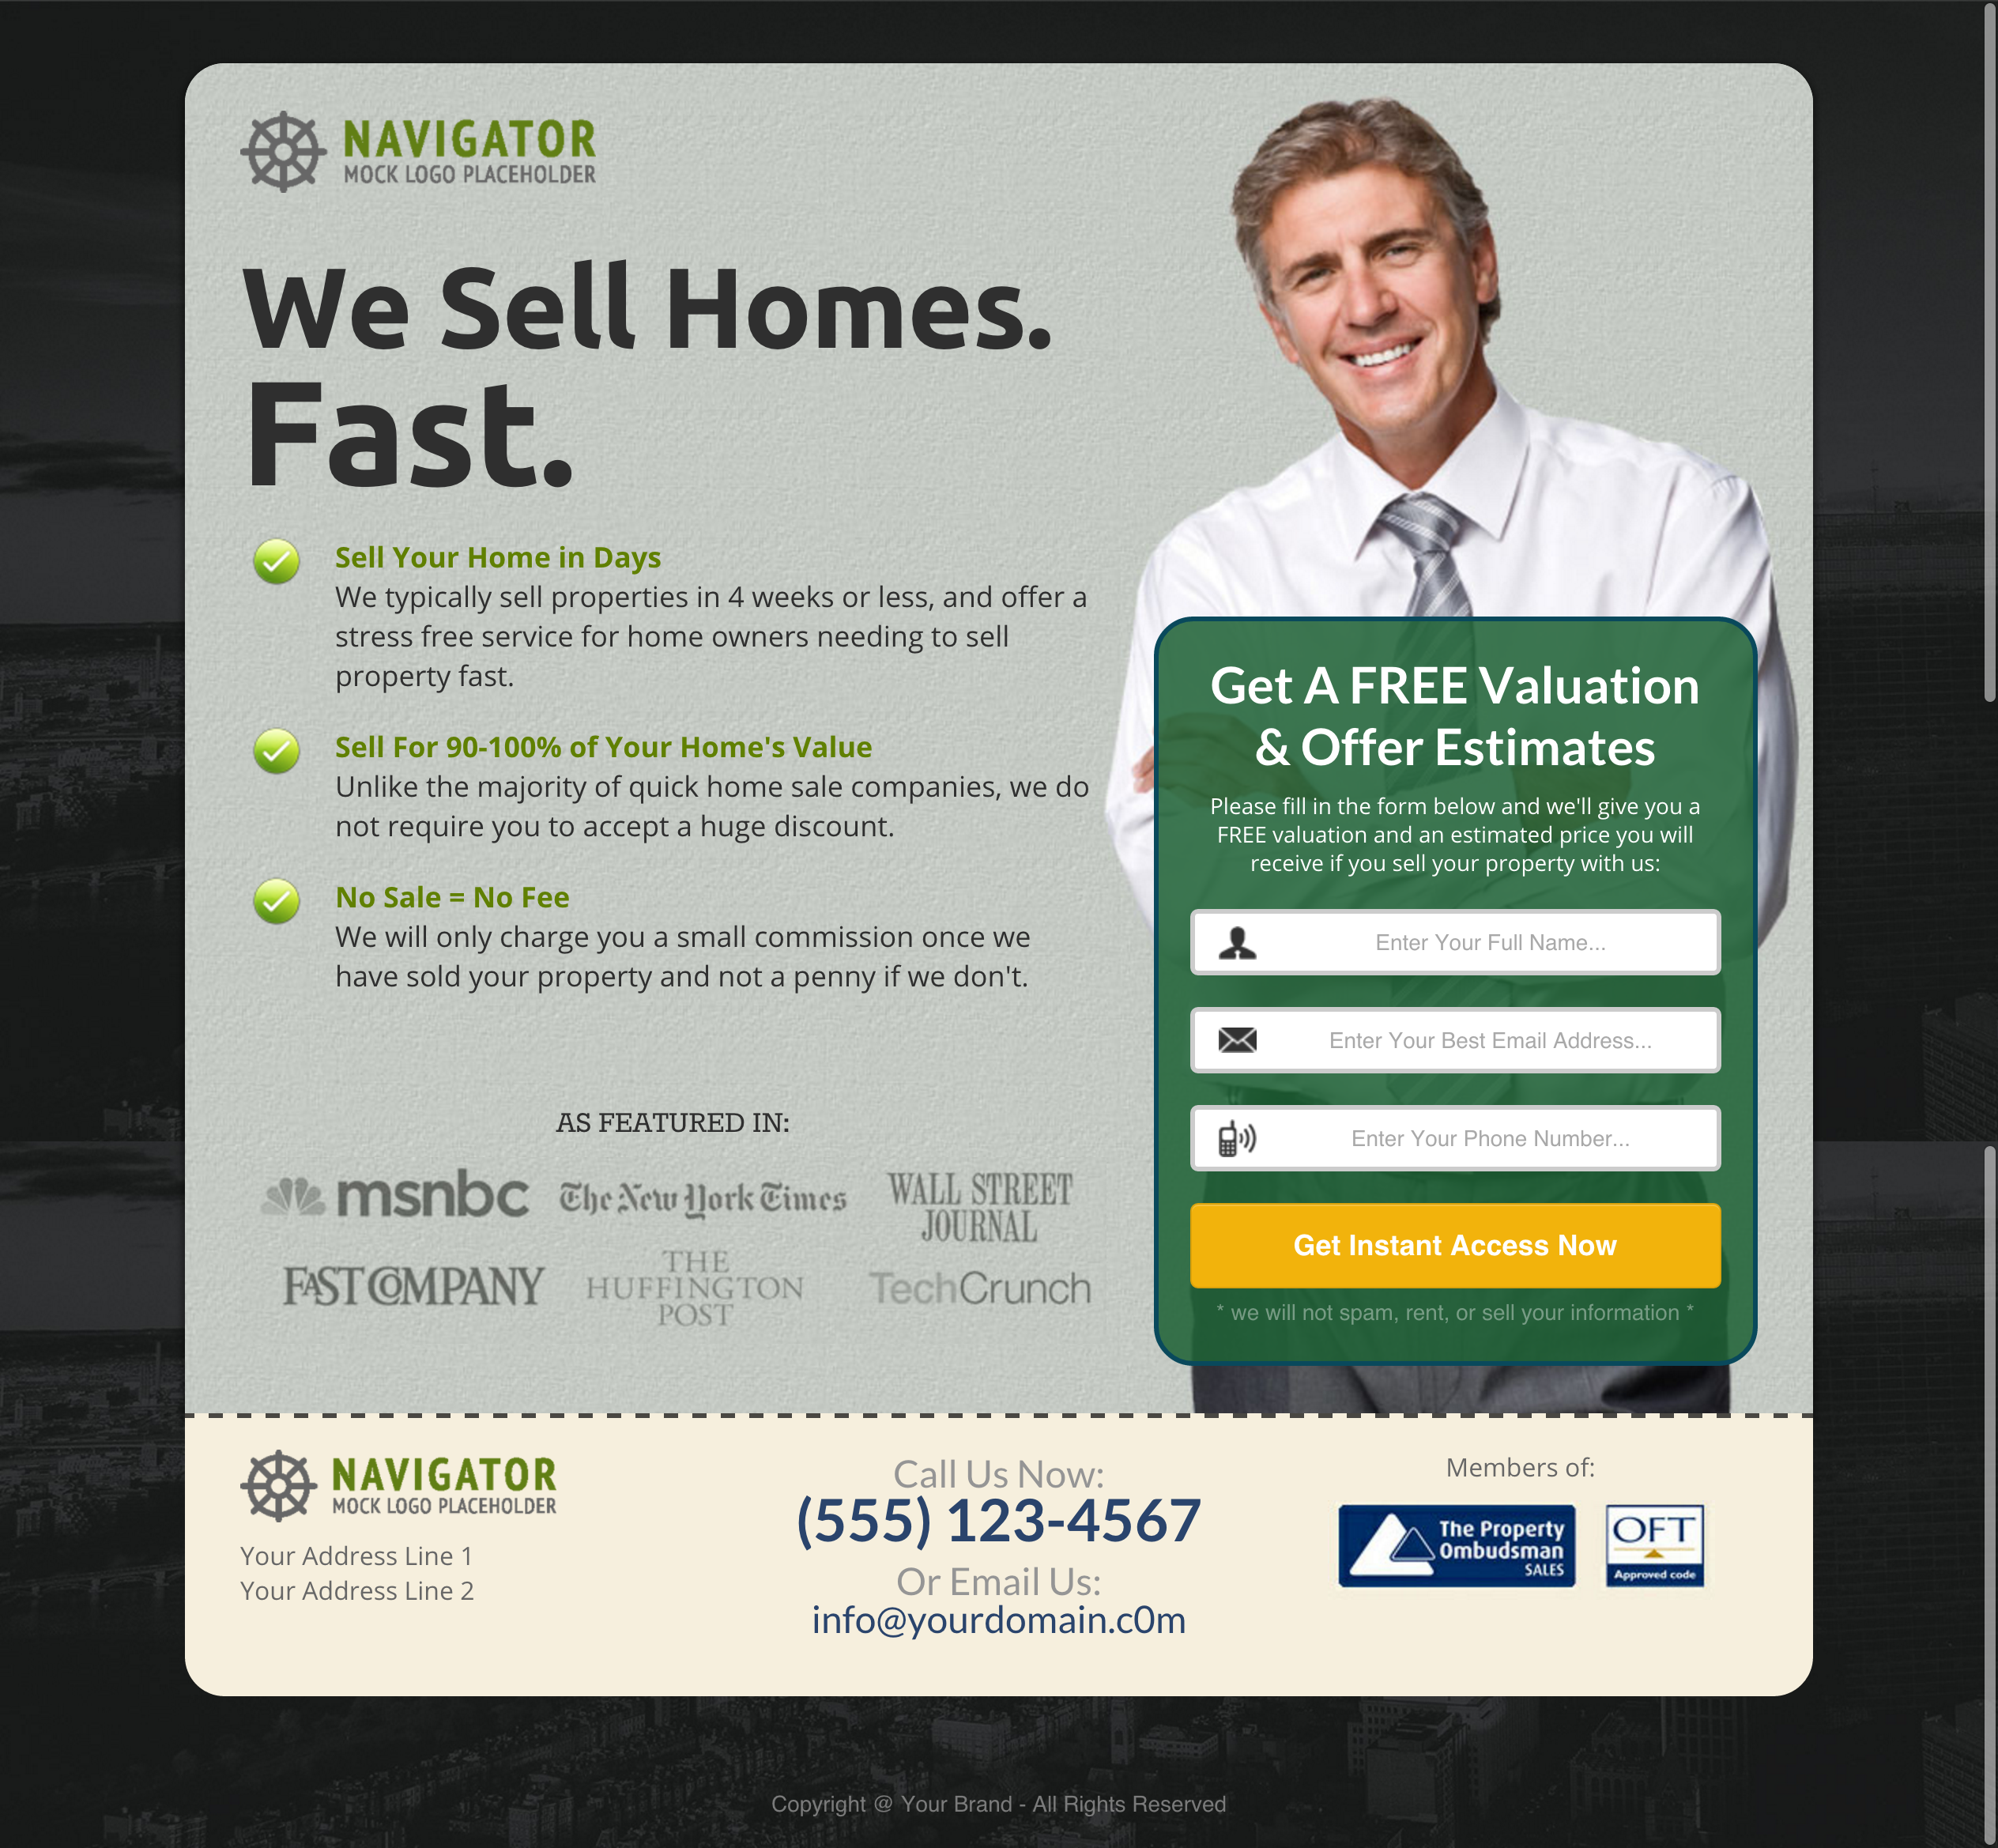 realestate - 8 Tips to Build an Effective Real Estate Landing Page